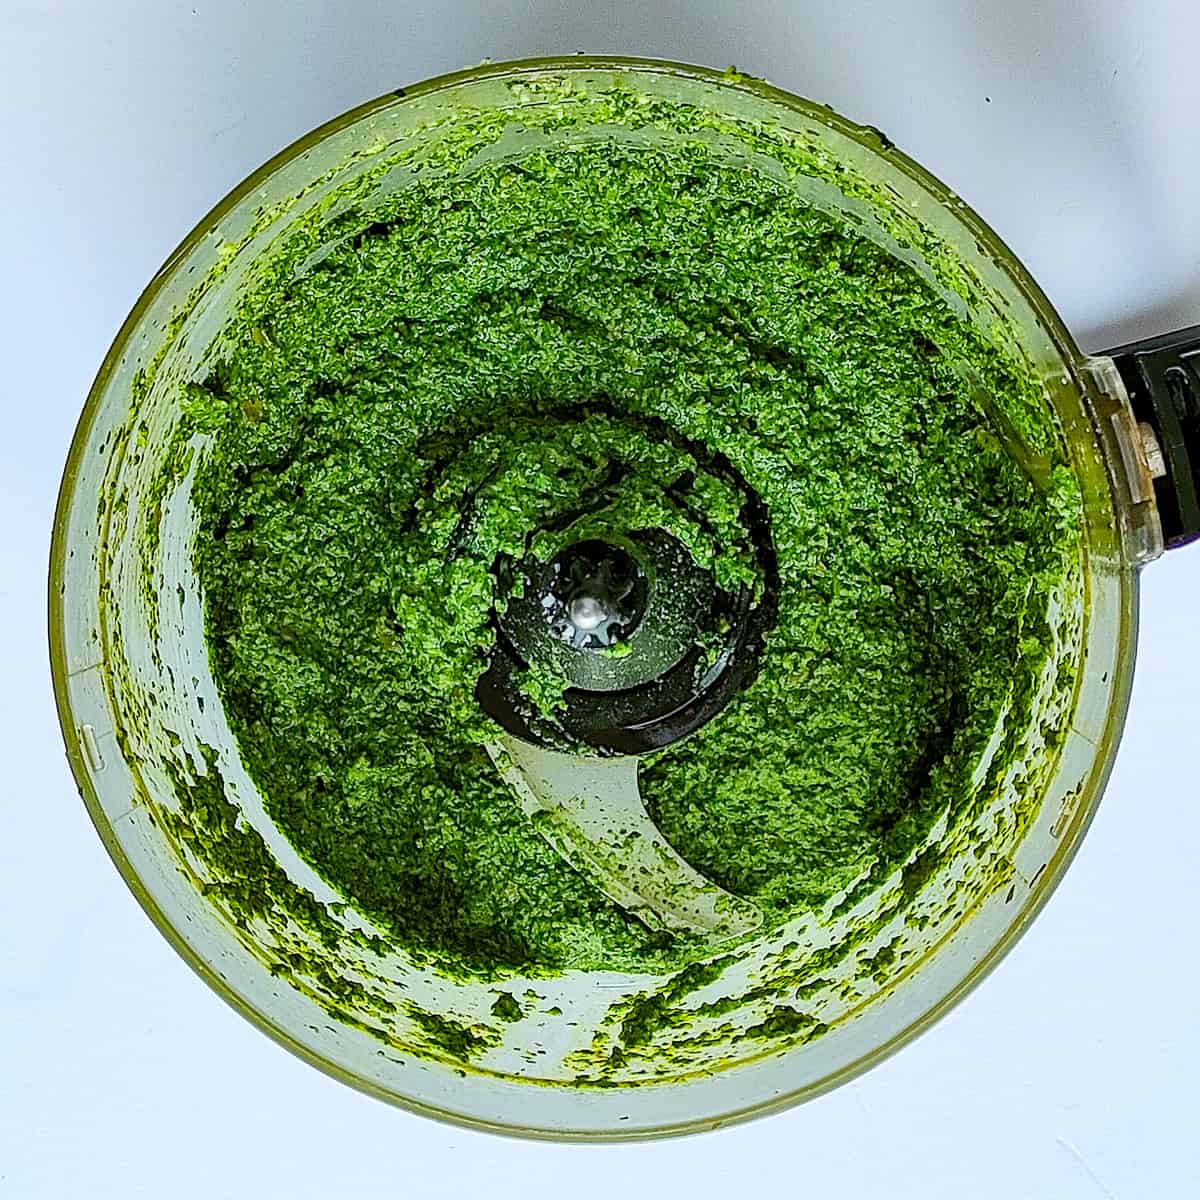 Blended spinach pesto in a food processor jar.